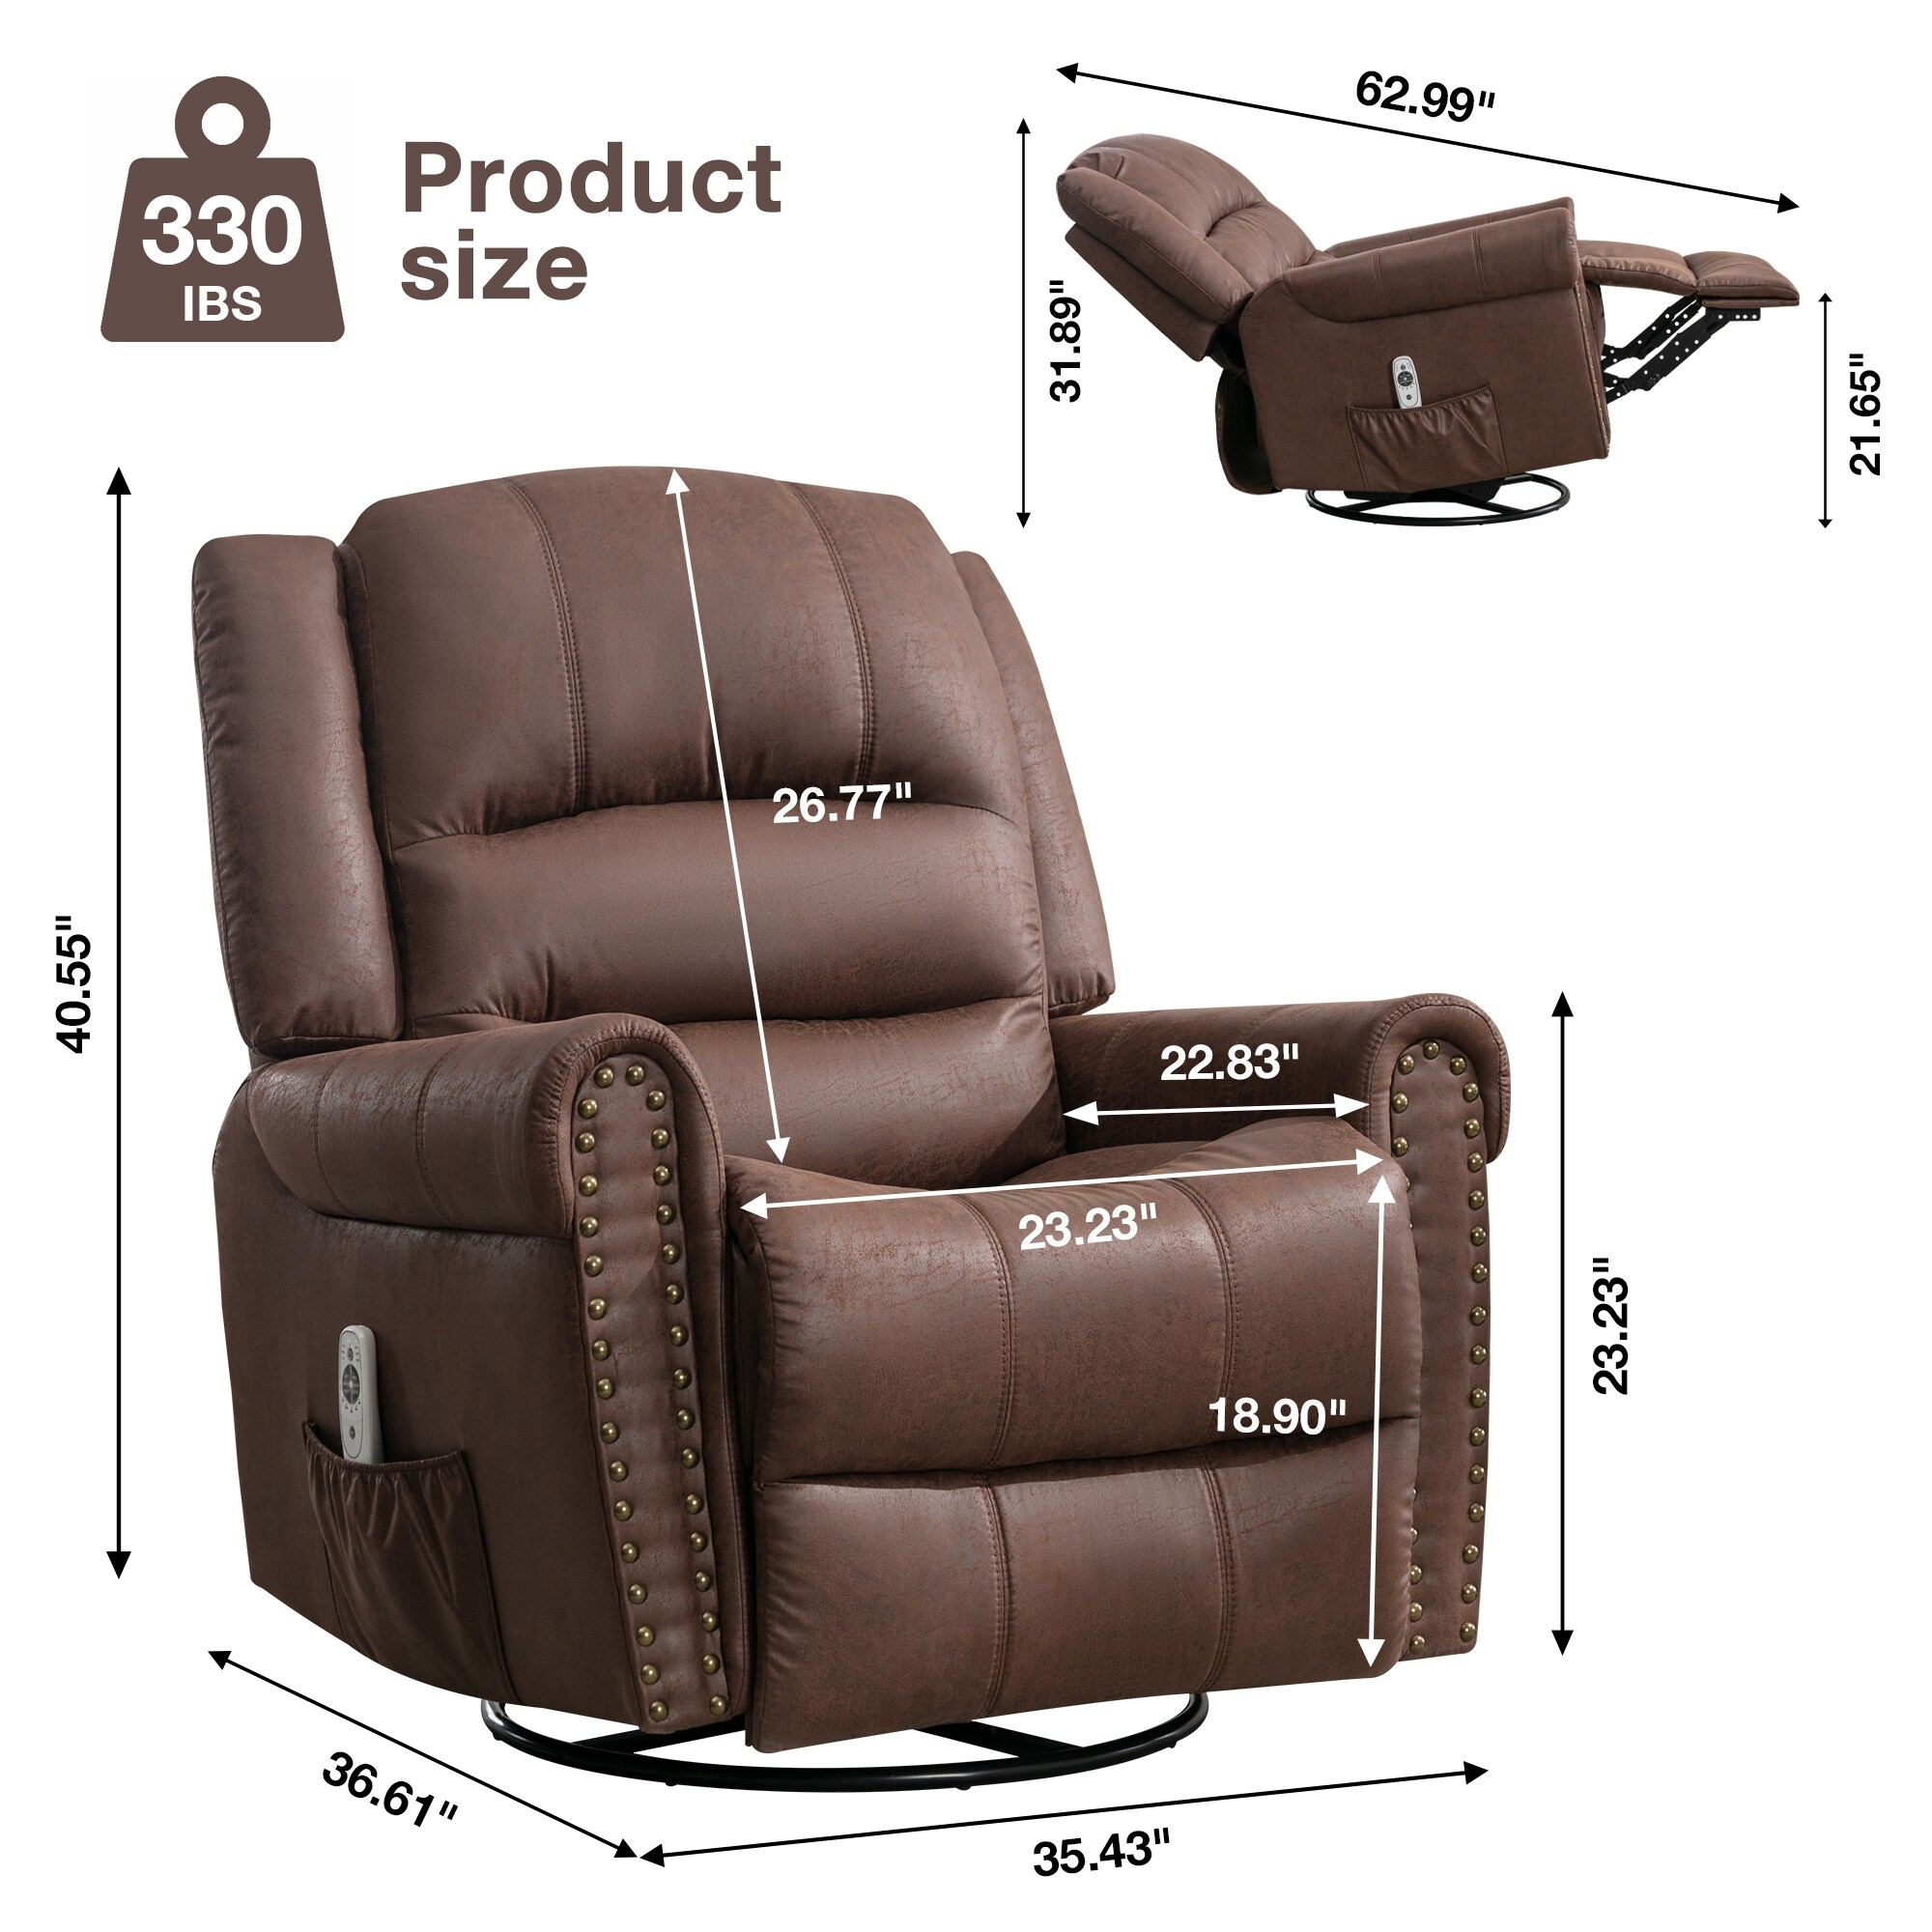 BTMWAY Heated Massage Recliner Chair, PU Leather Manual Recliner Couch with  Rocking Function, Cup Holder and Side Pocket, Ergonomic Reclining Sofa